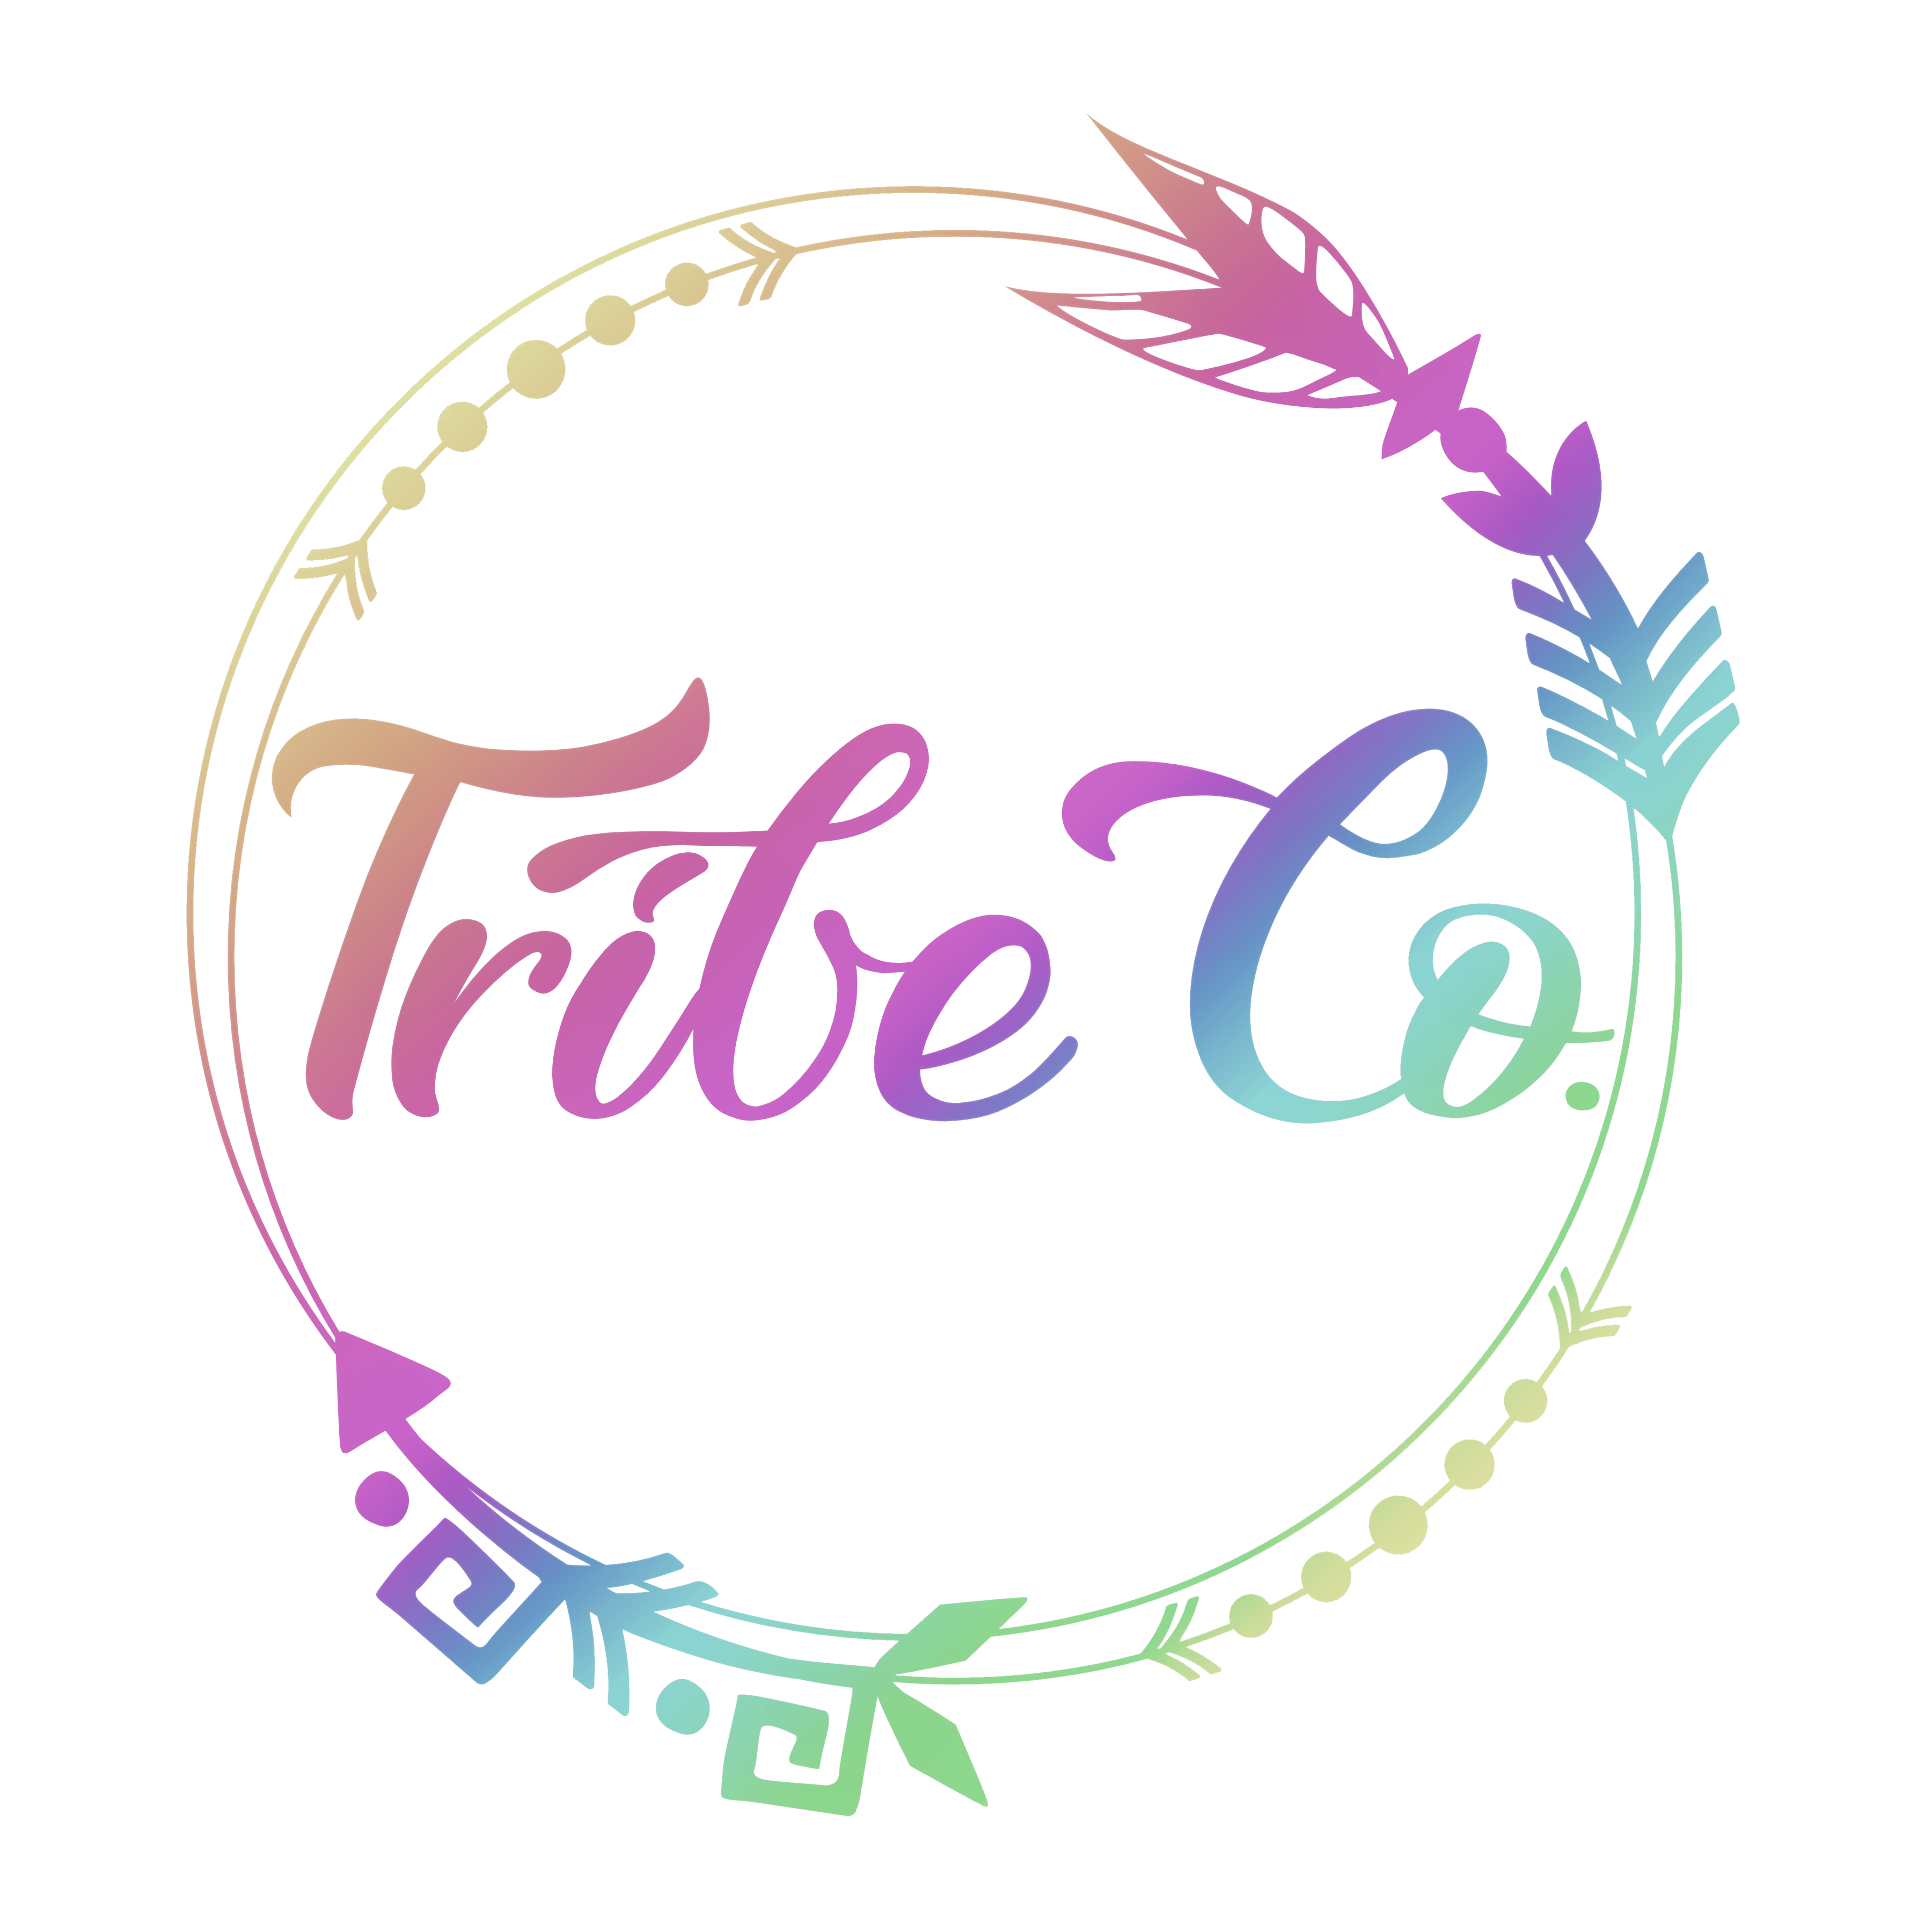 Tribe Co